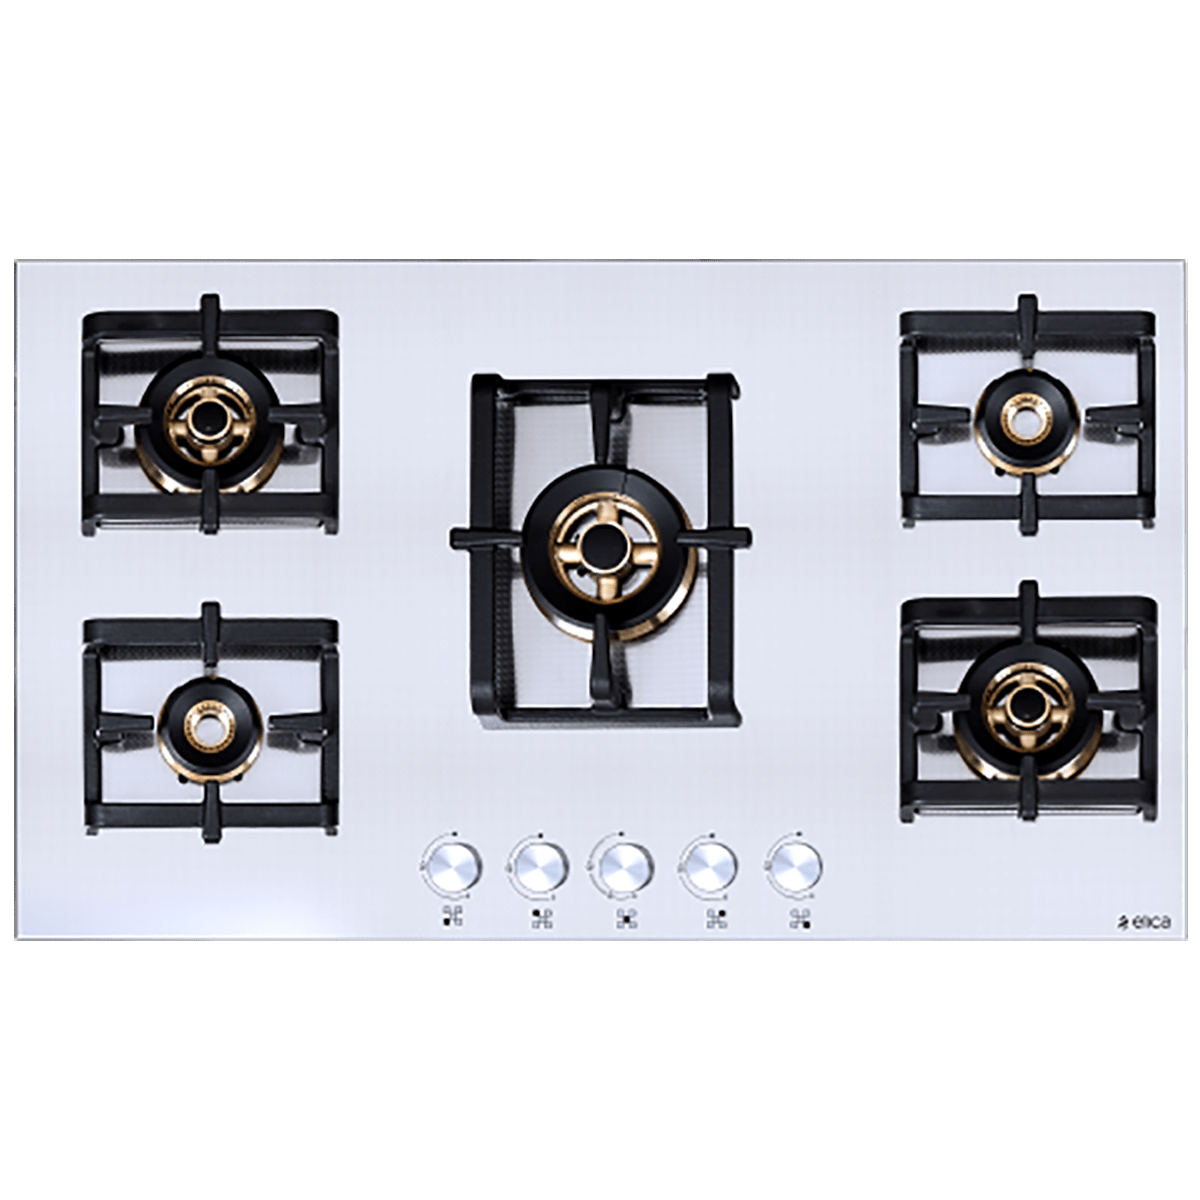 Elica Inox Pro FB MFC 5B 90 MT FFD 5 Burner Stainless Steel Built-in Gas Hob (Automatic Ignition, 3026, Steel)_1